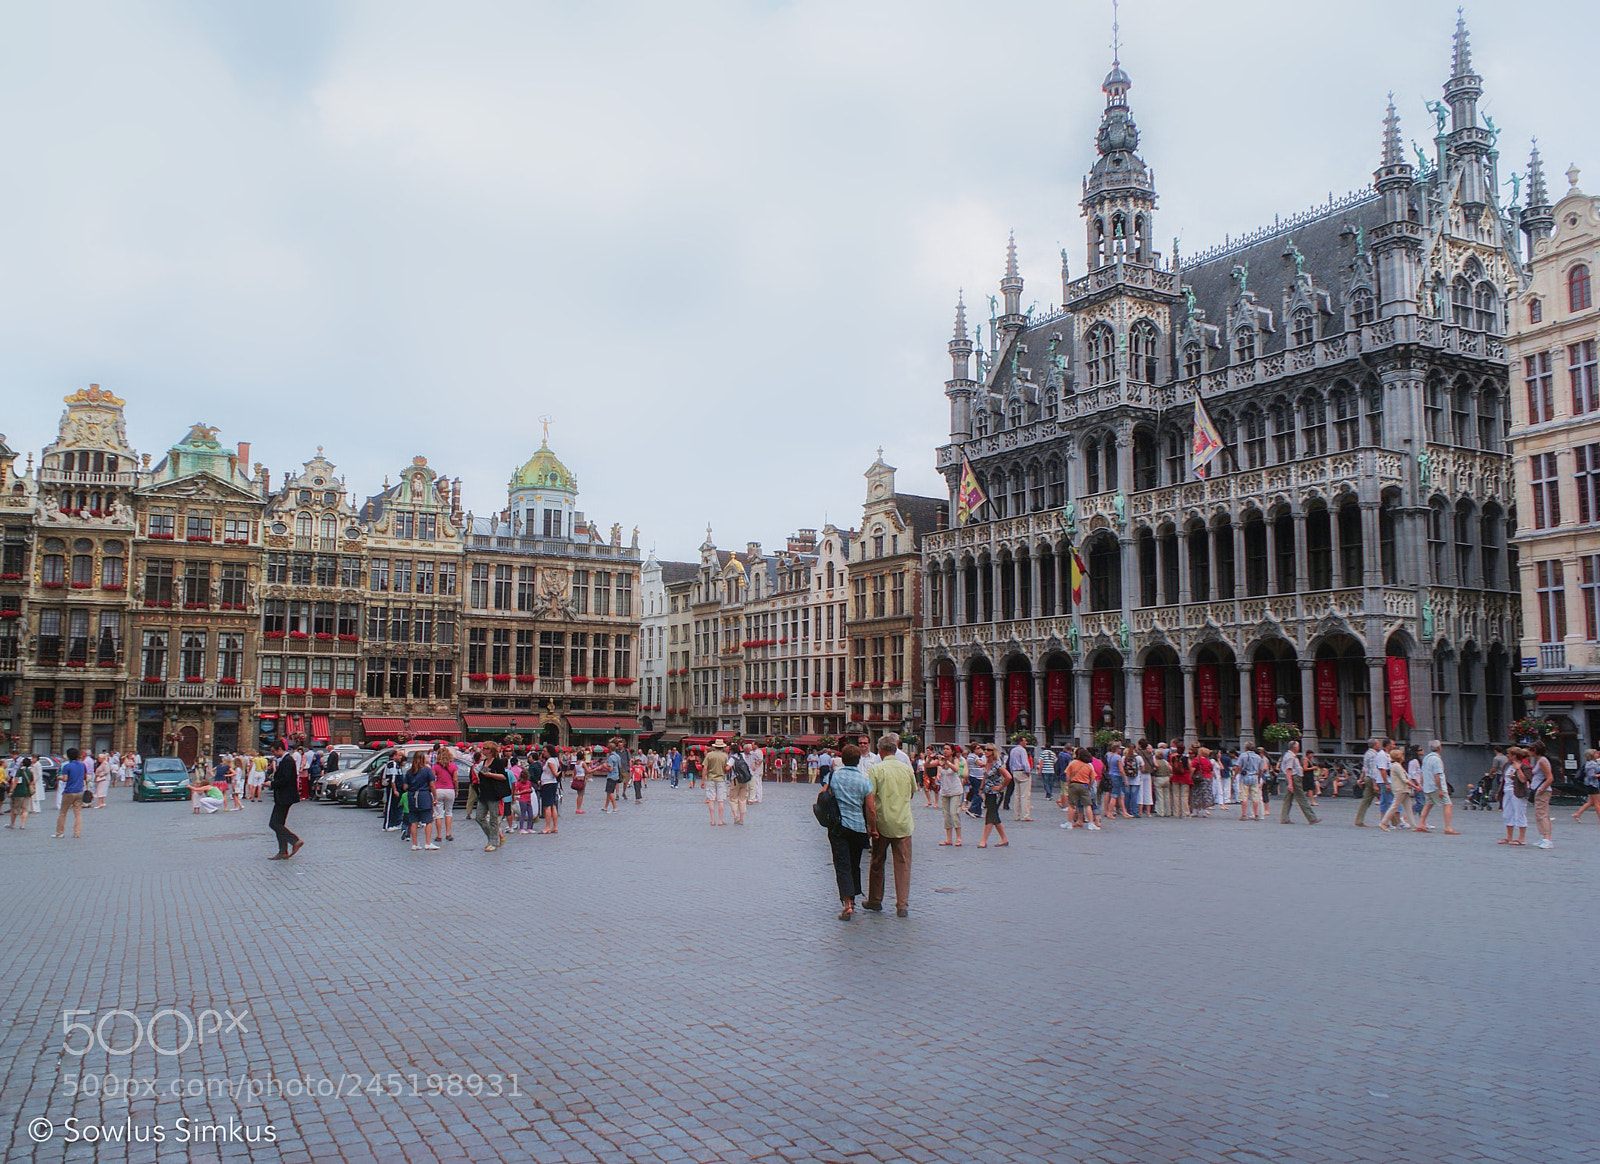 Sony Alpha DSLR-A300 sample photo. The grand place photography